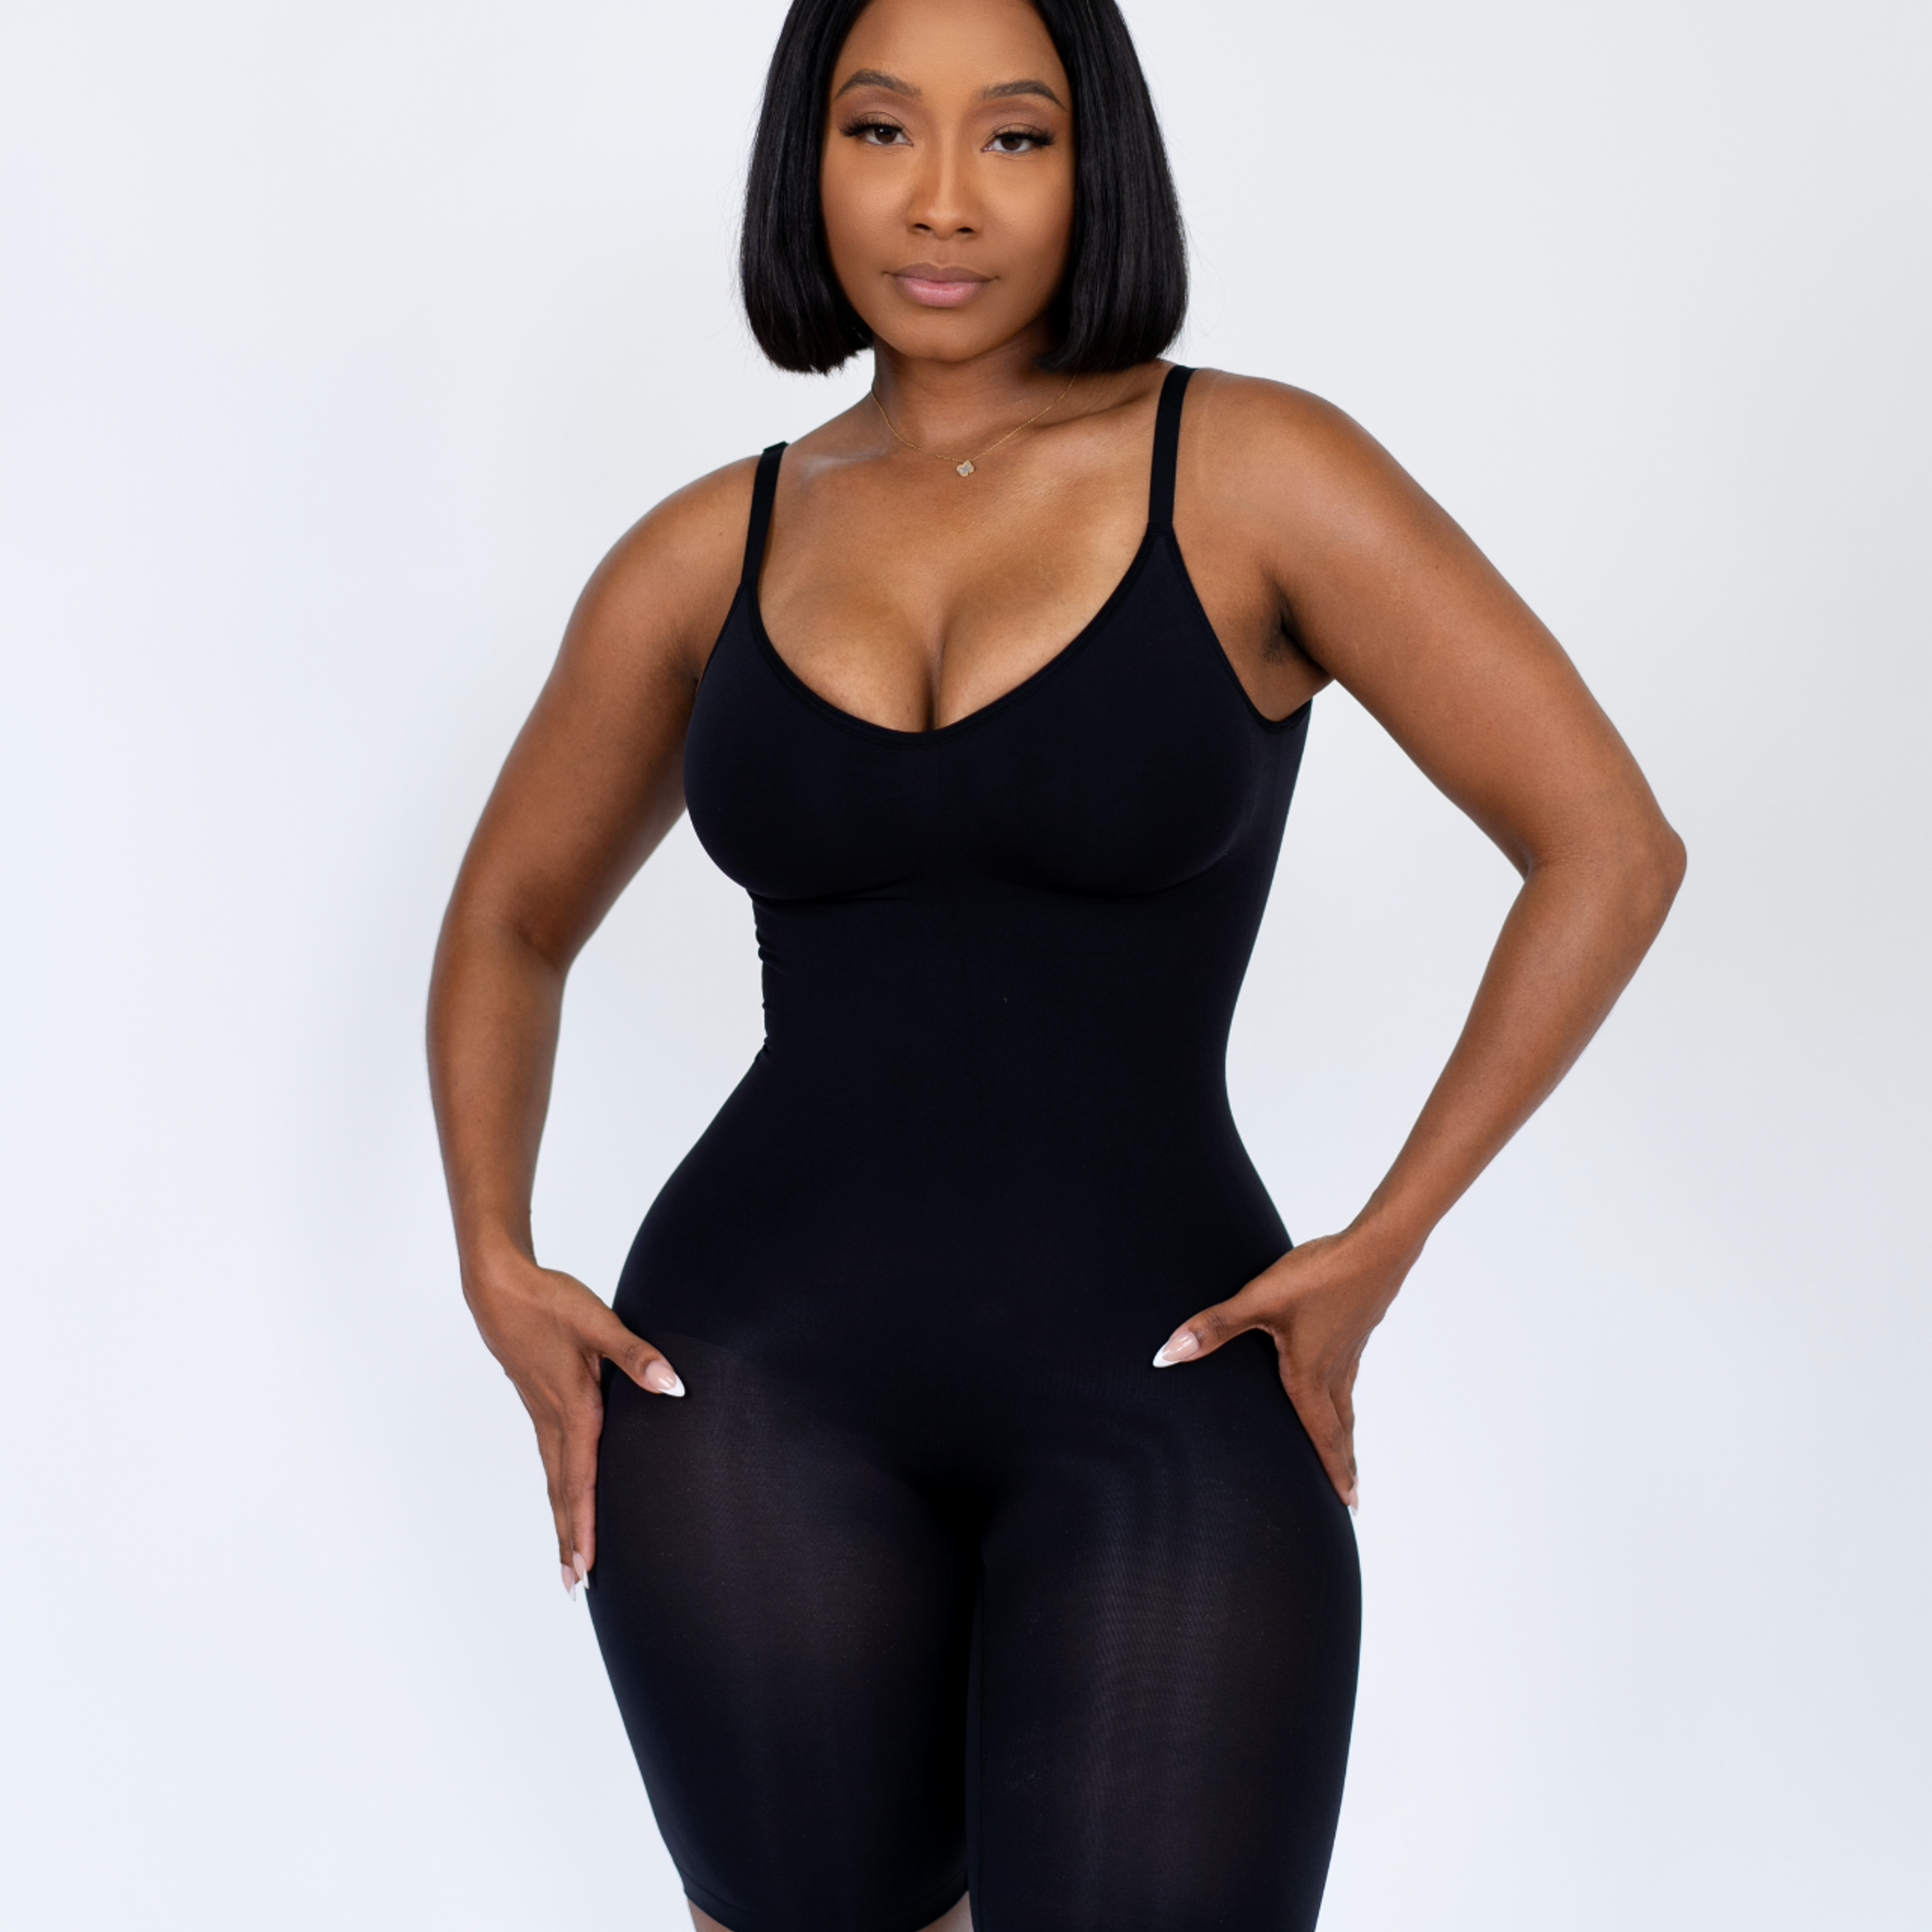 https://cdn.prod.marmalade.co/products/3840x3840/filters:quality(80)/www.jsculptfitness.com%2Fproducts%2Fnew-backless-above-the-knee-seamless-compression-bodysuit%2F1691758451%2FScreenShot2023-08-11at7.42.30AM.png